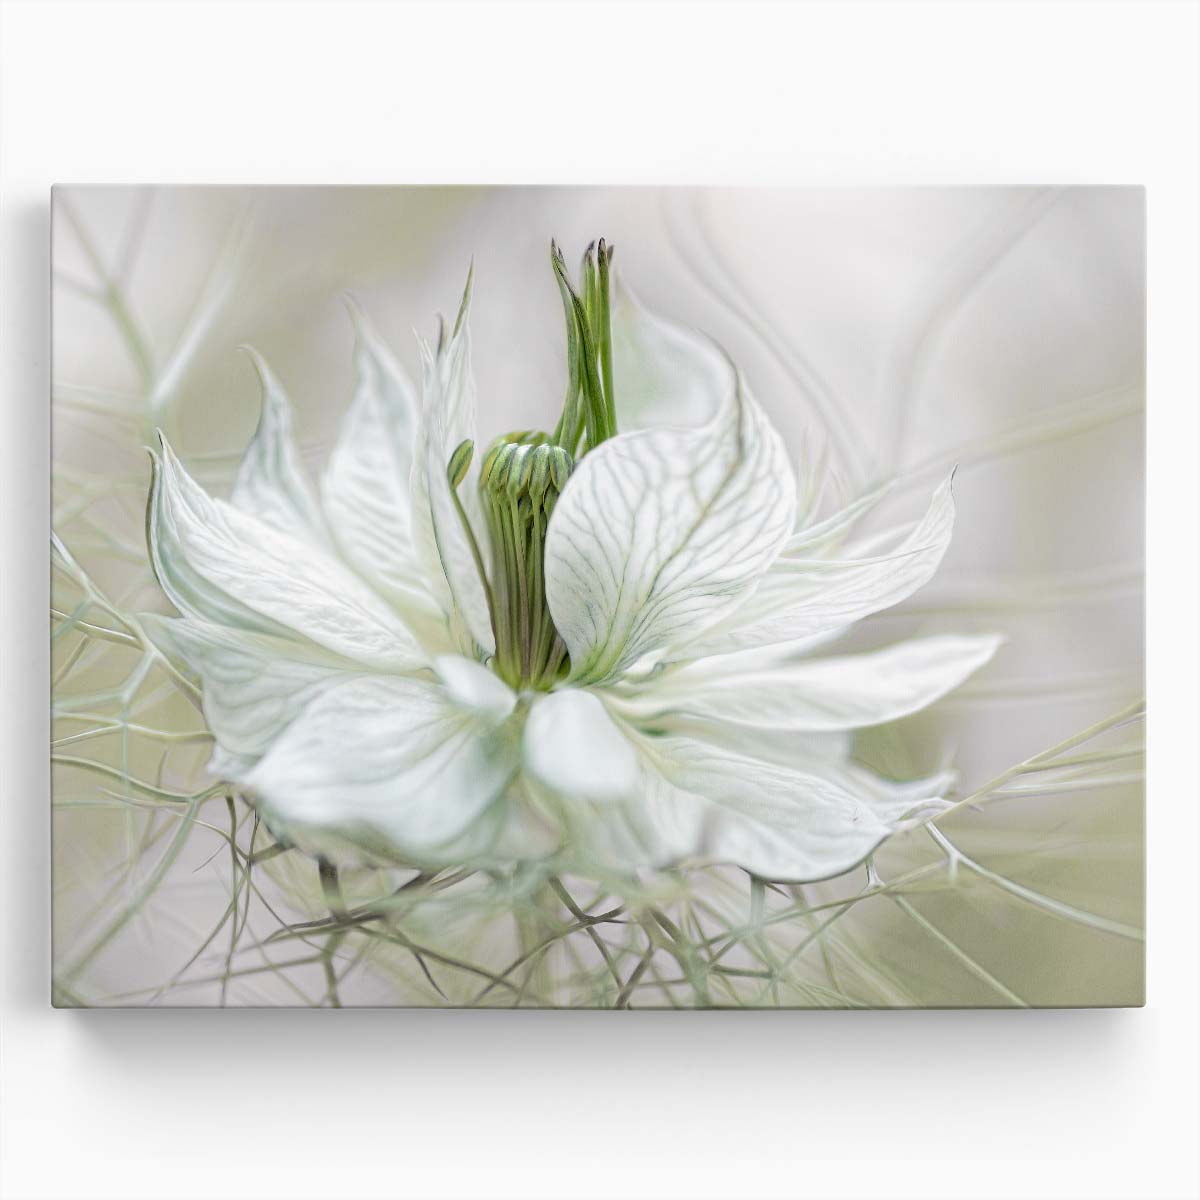 Delicate White Nigella Flower Macro Photography Wall Art by Luxuriance Designs. Made in USA.